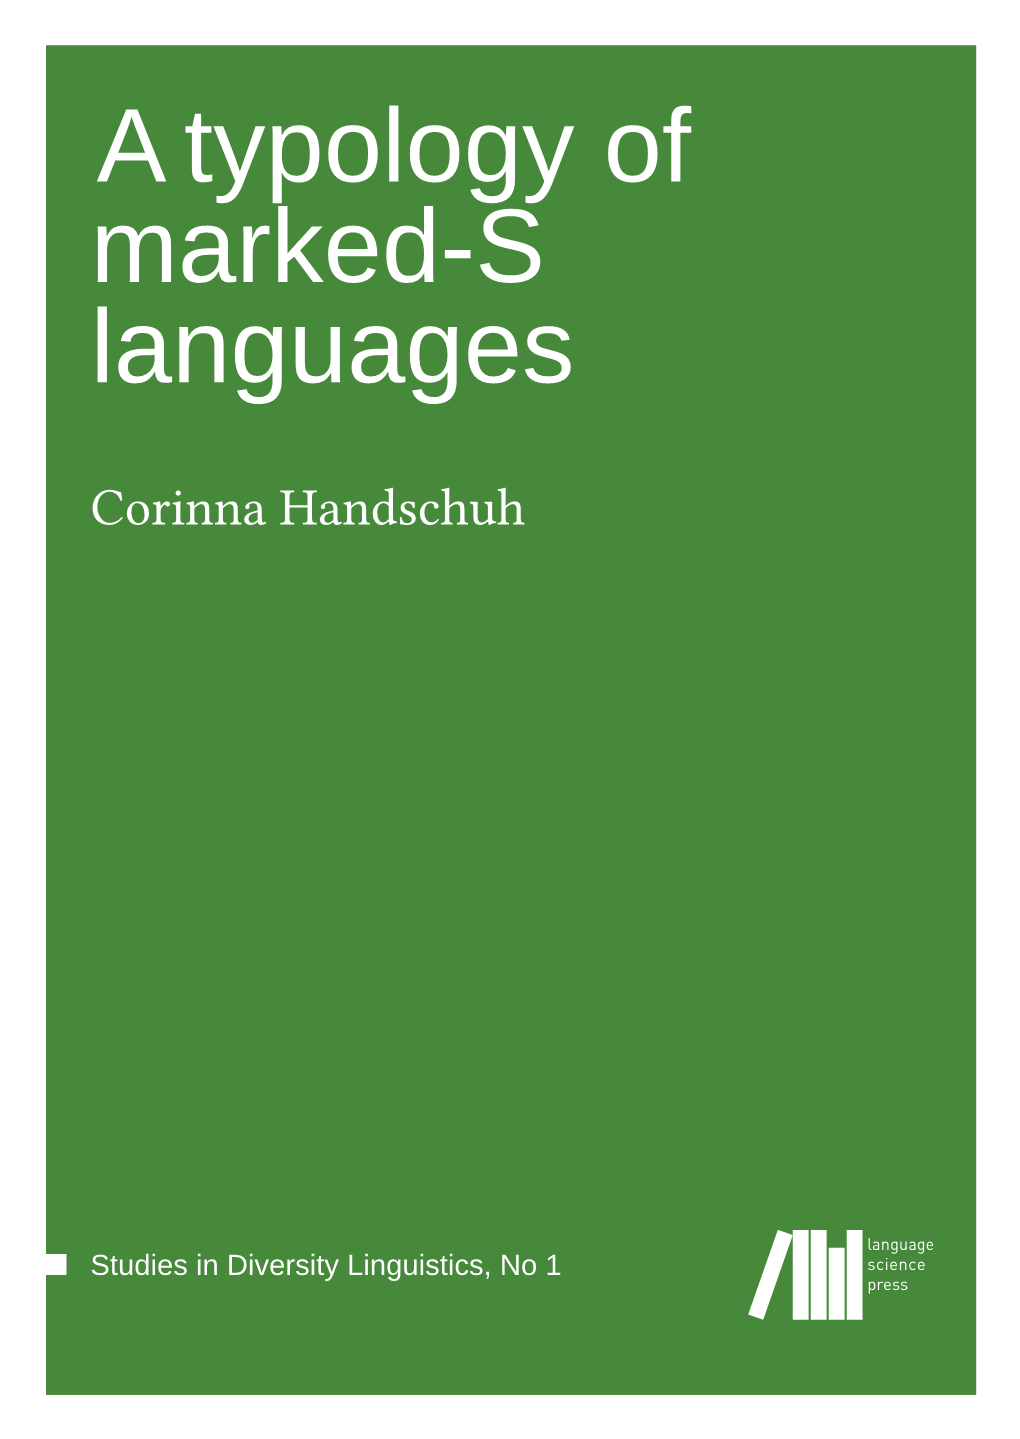 Atypology of Marked-S Languages